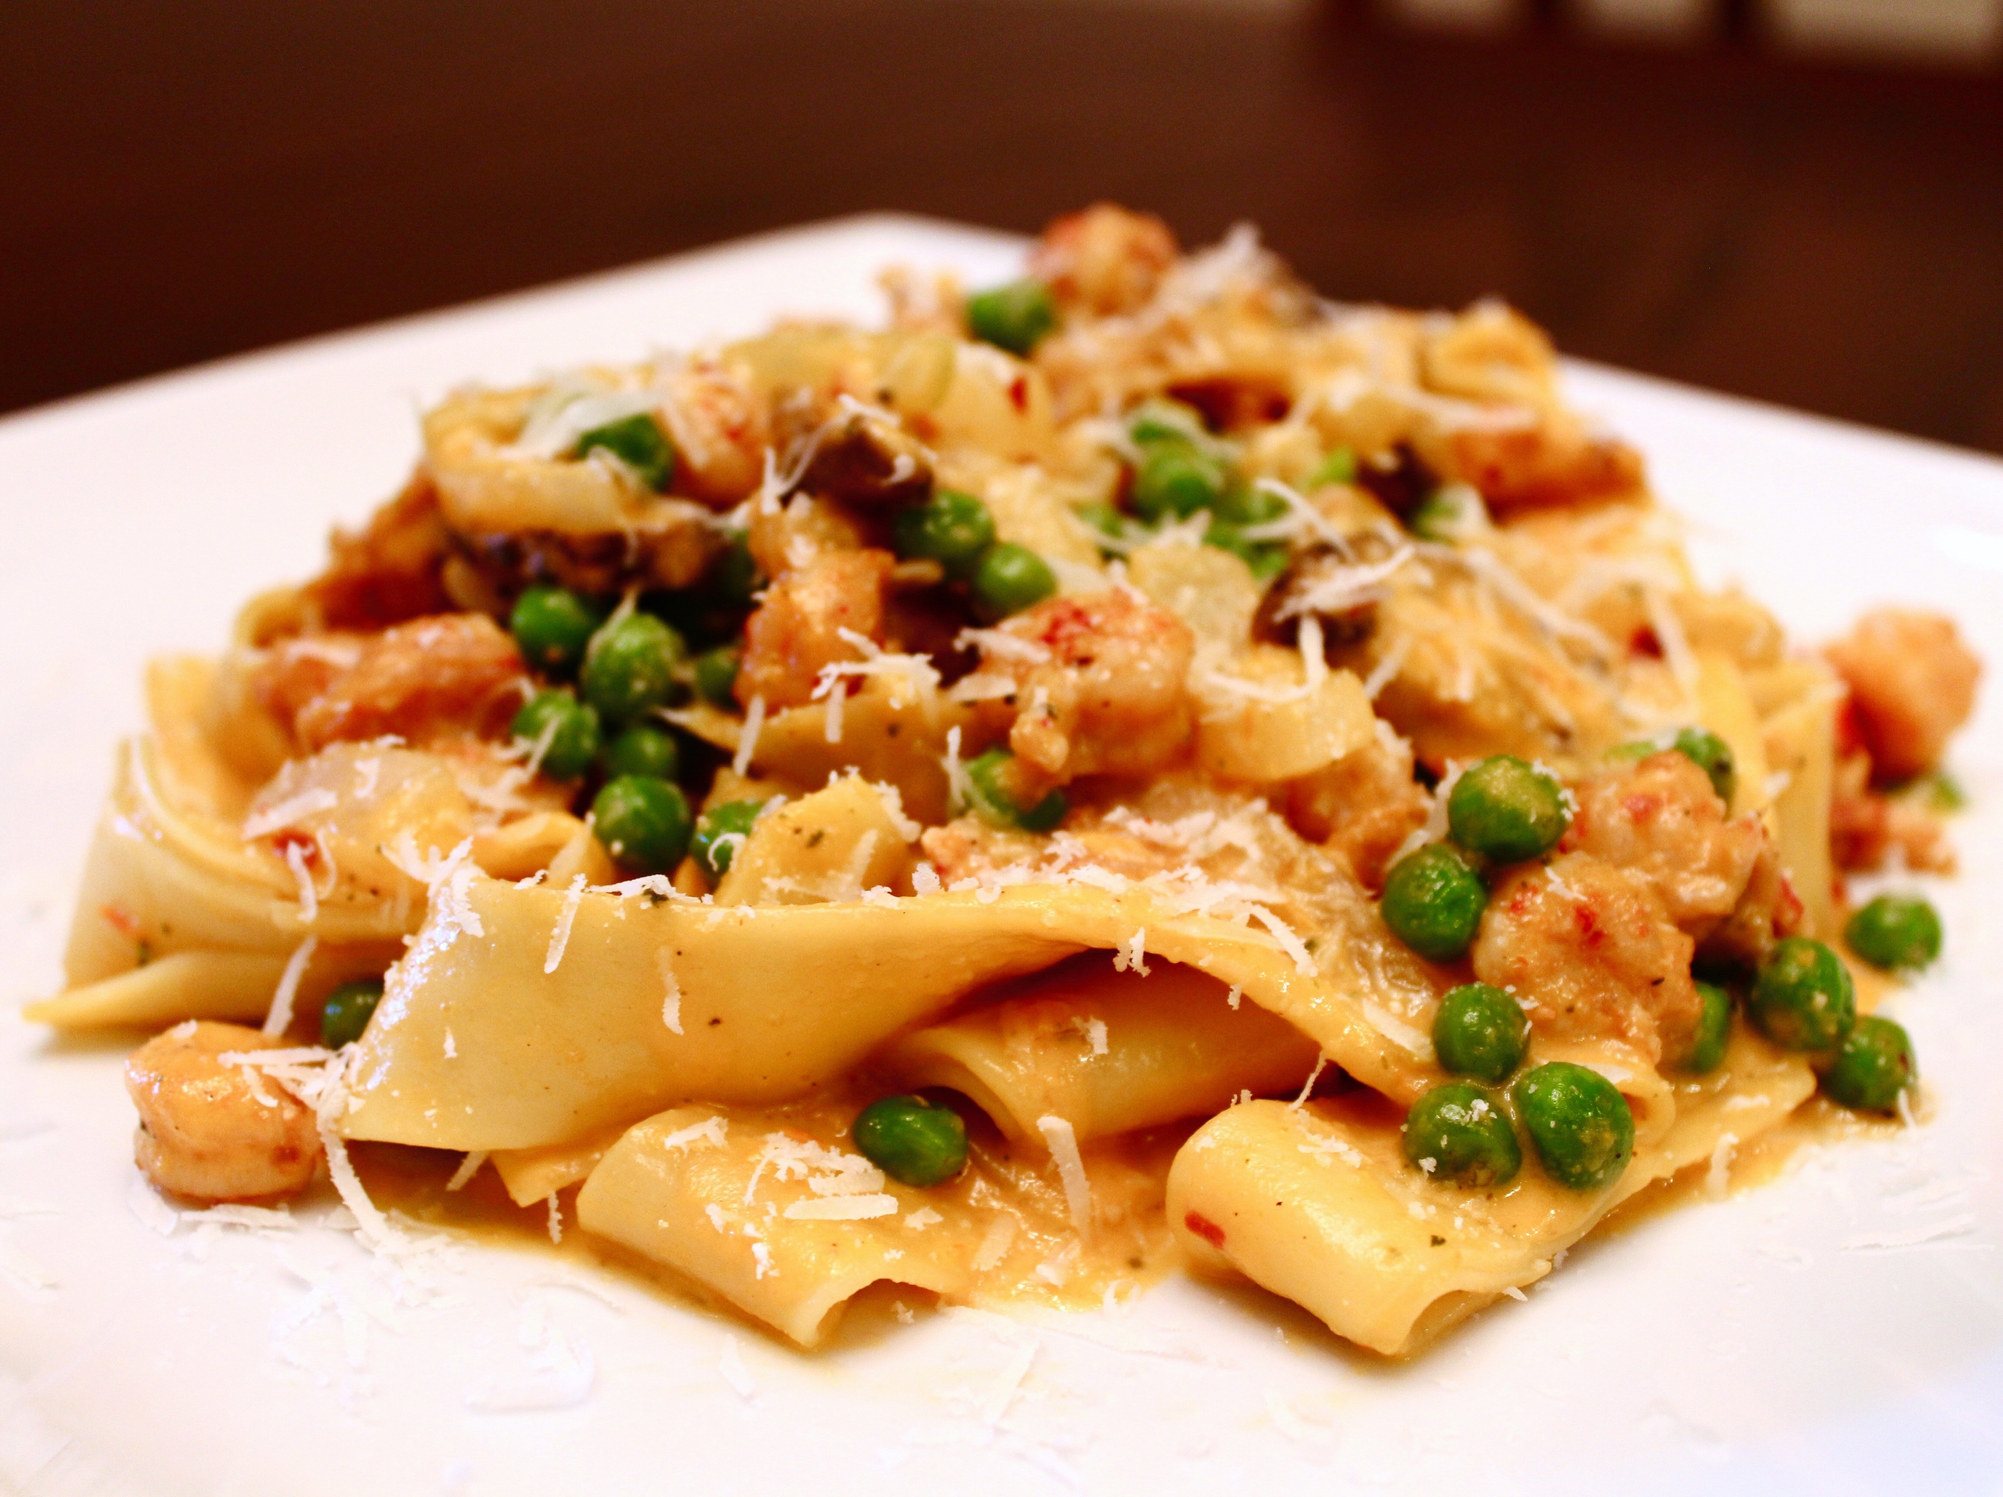 Pasta with tomato sauce and peas.